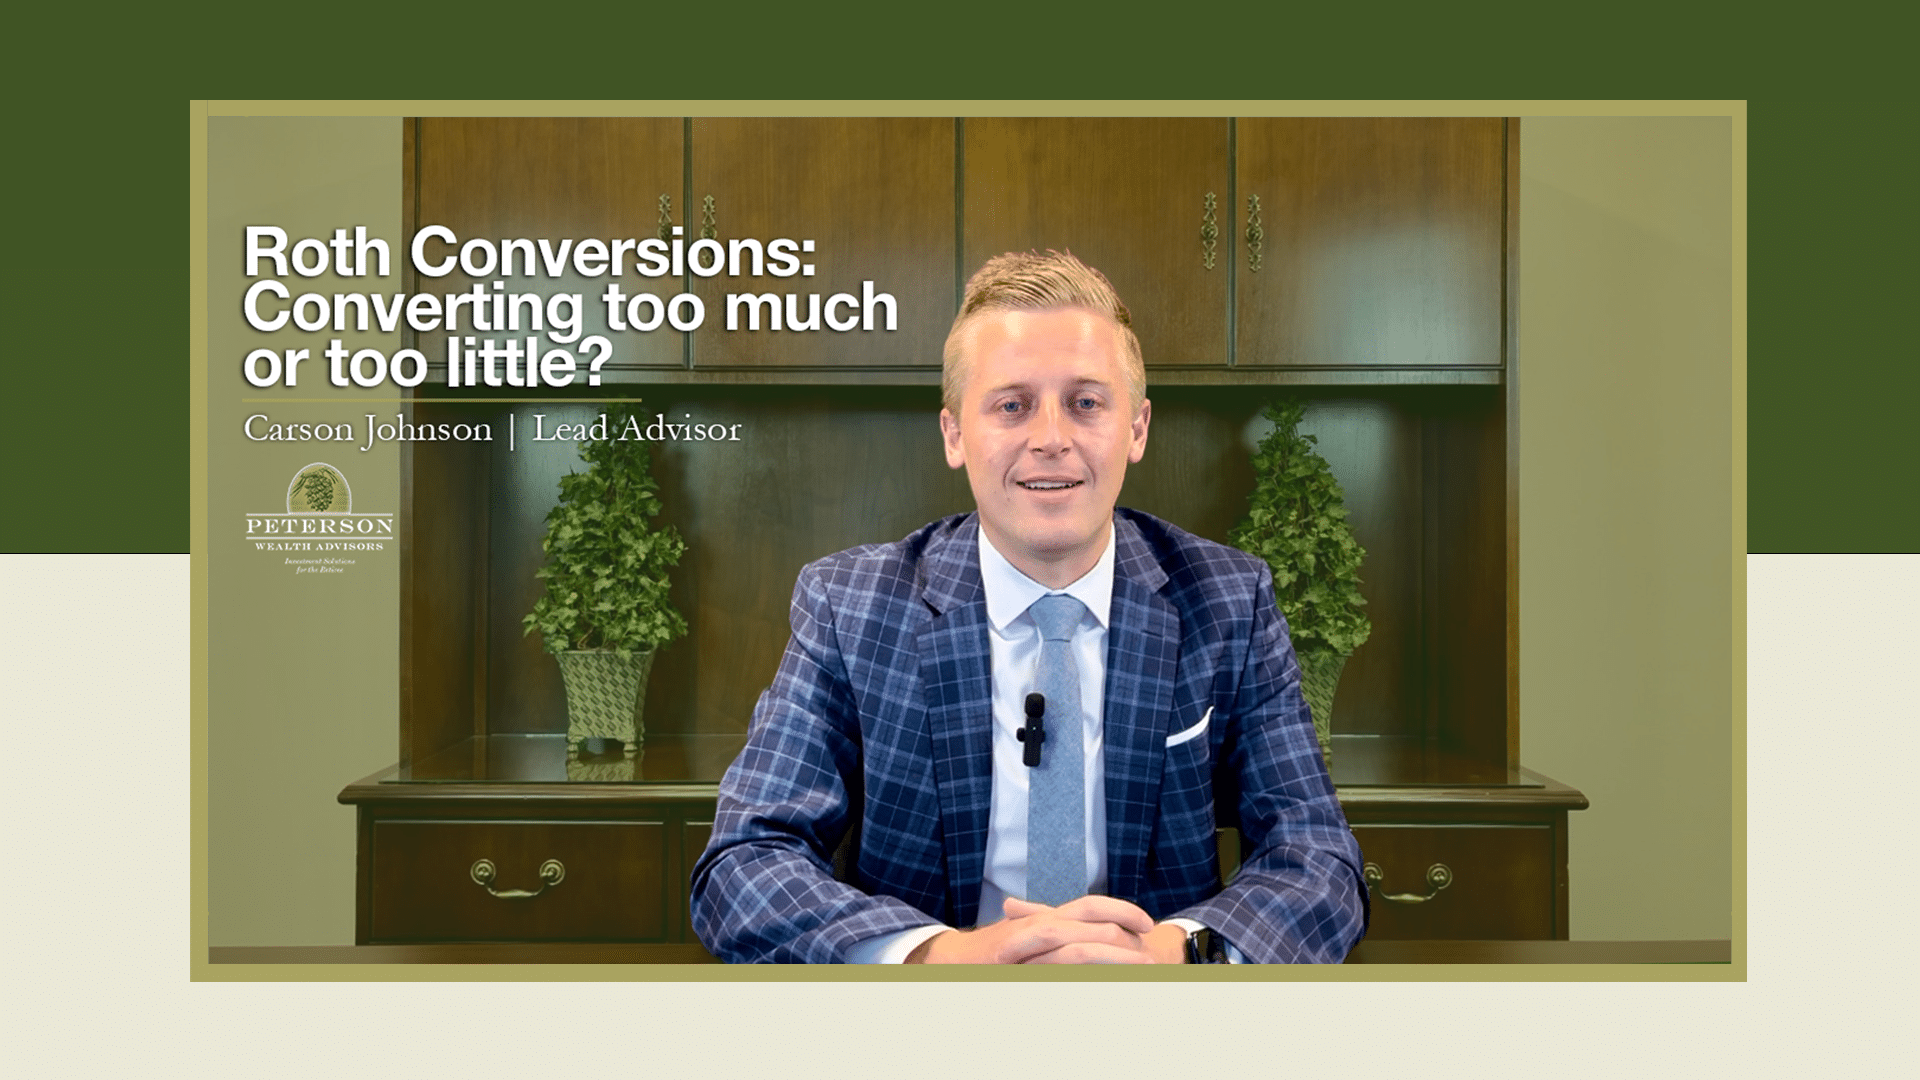 Roth Conversions: Converting too much or too little?